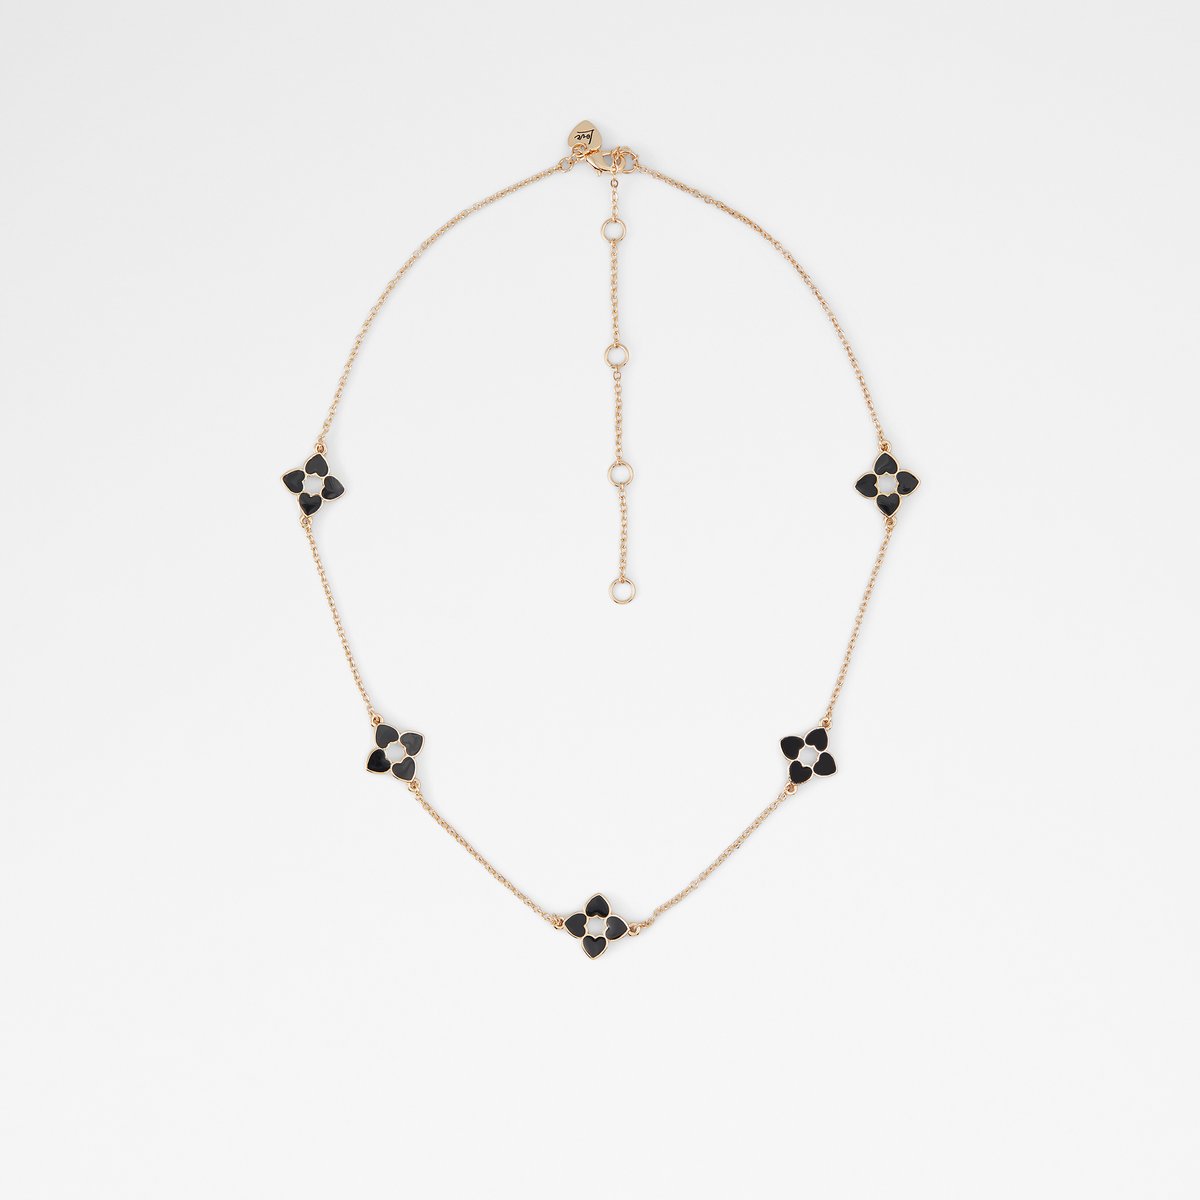 Agerisee Single-Strand Necklace